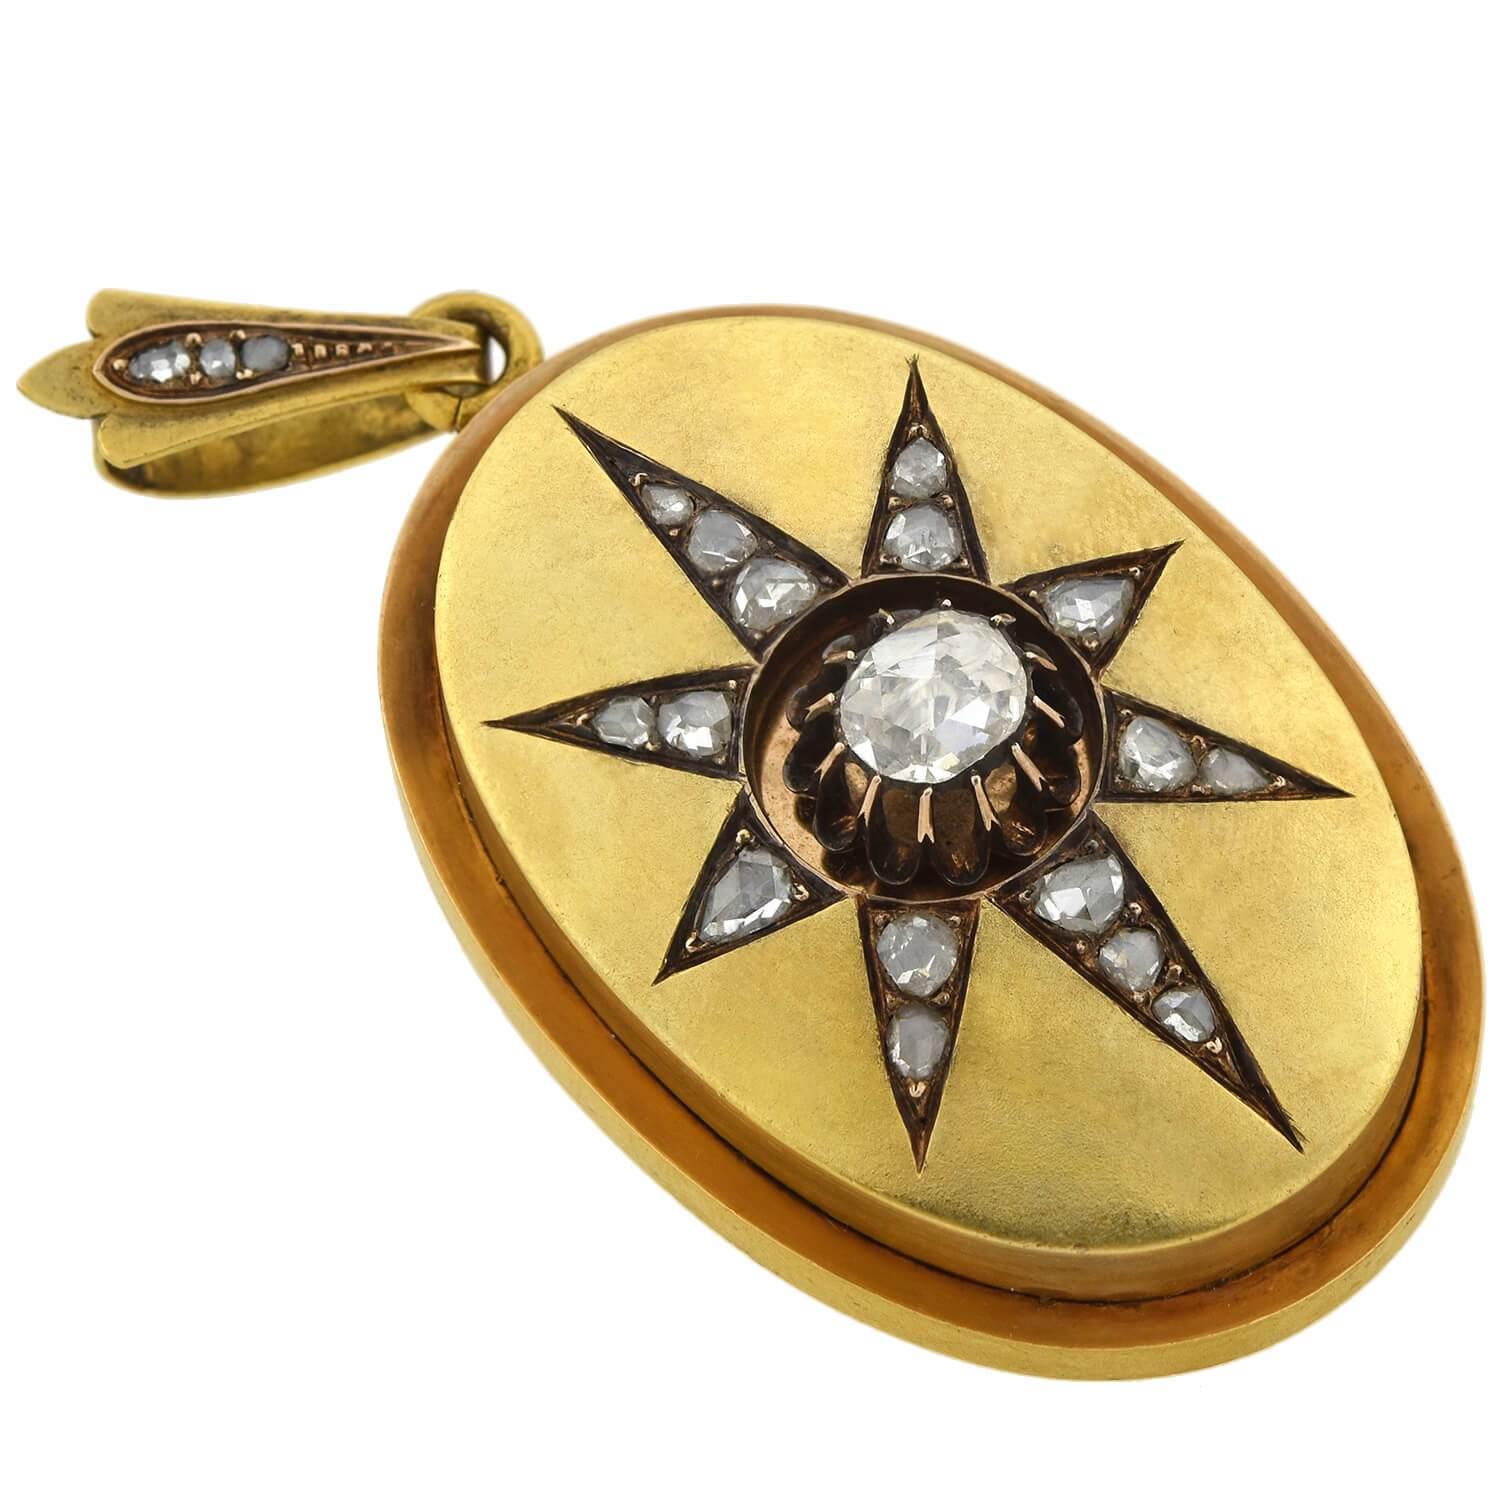 An exquisite diamond starburst locket from the Victorian (ca1880) era! Crafted in 18kt yellow gold, this large, oval-shaped piece adorns a diamond encrusted starburst motif on the front. The sparkling old Rose Cut stones graduate outwards along the